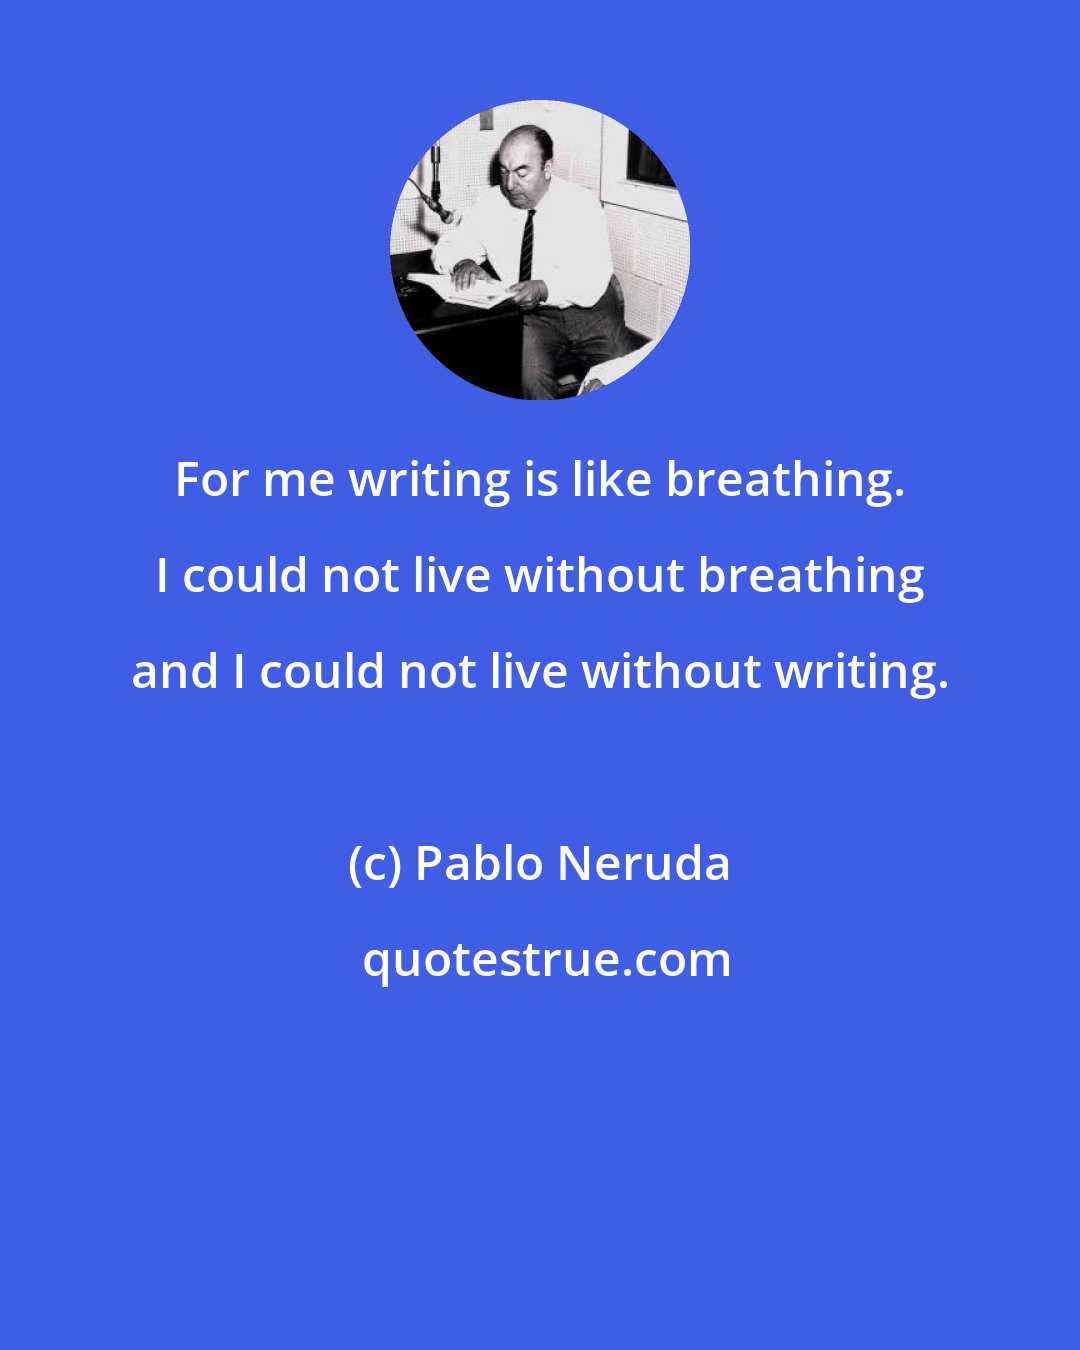 Pablo Neruda: For me writing is like breathing. I could not live without breathing and I could not live without writing.